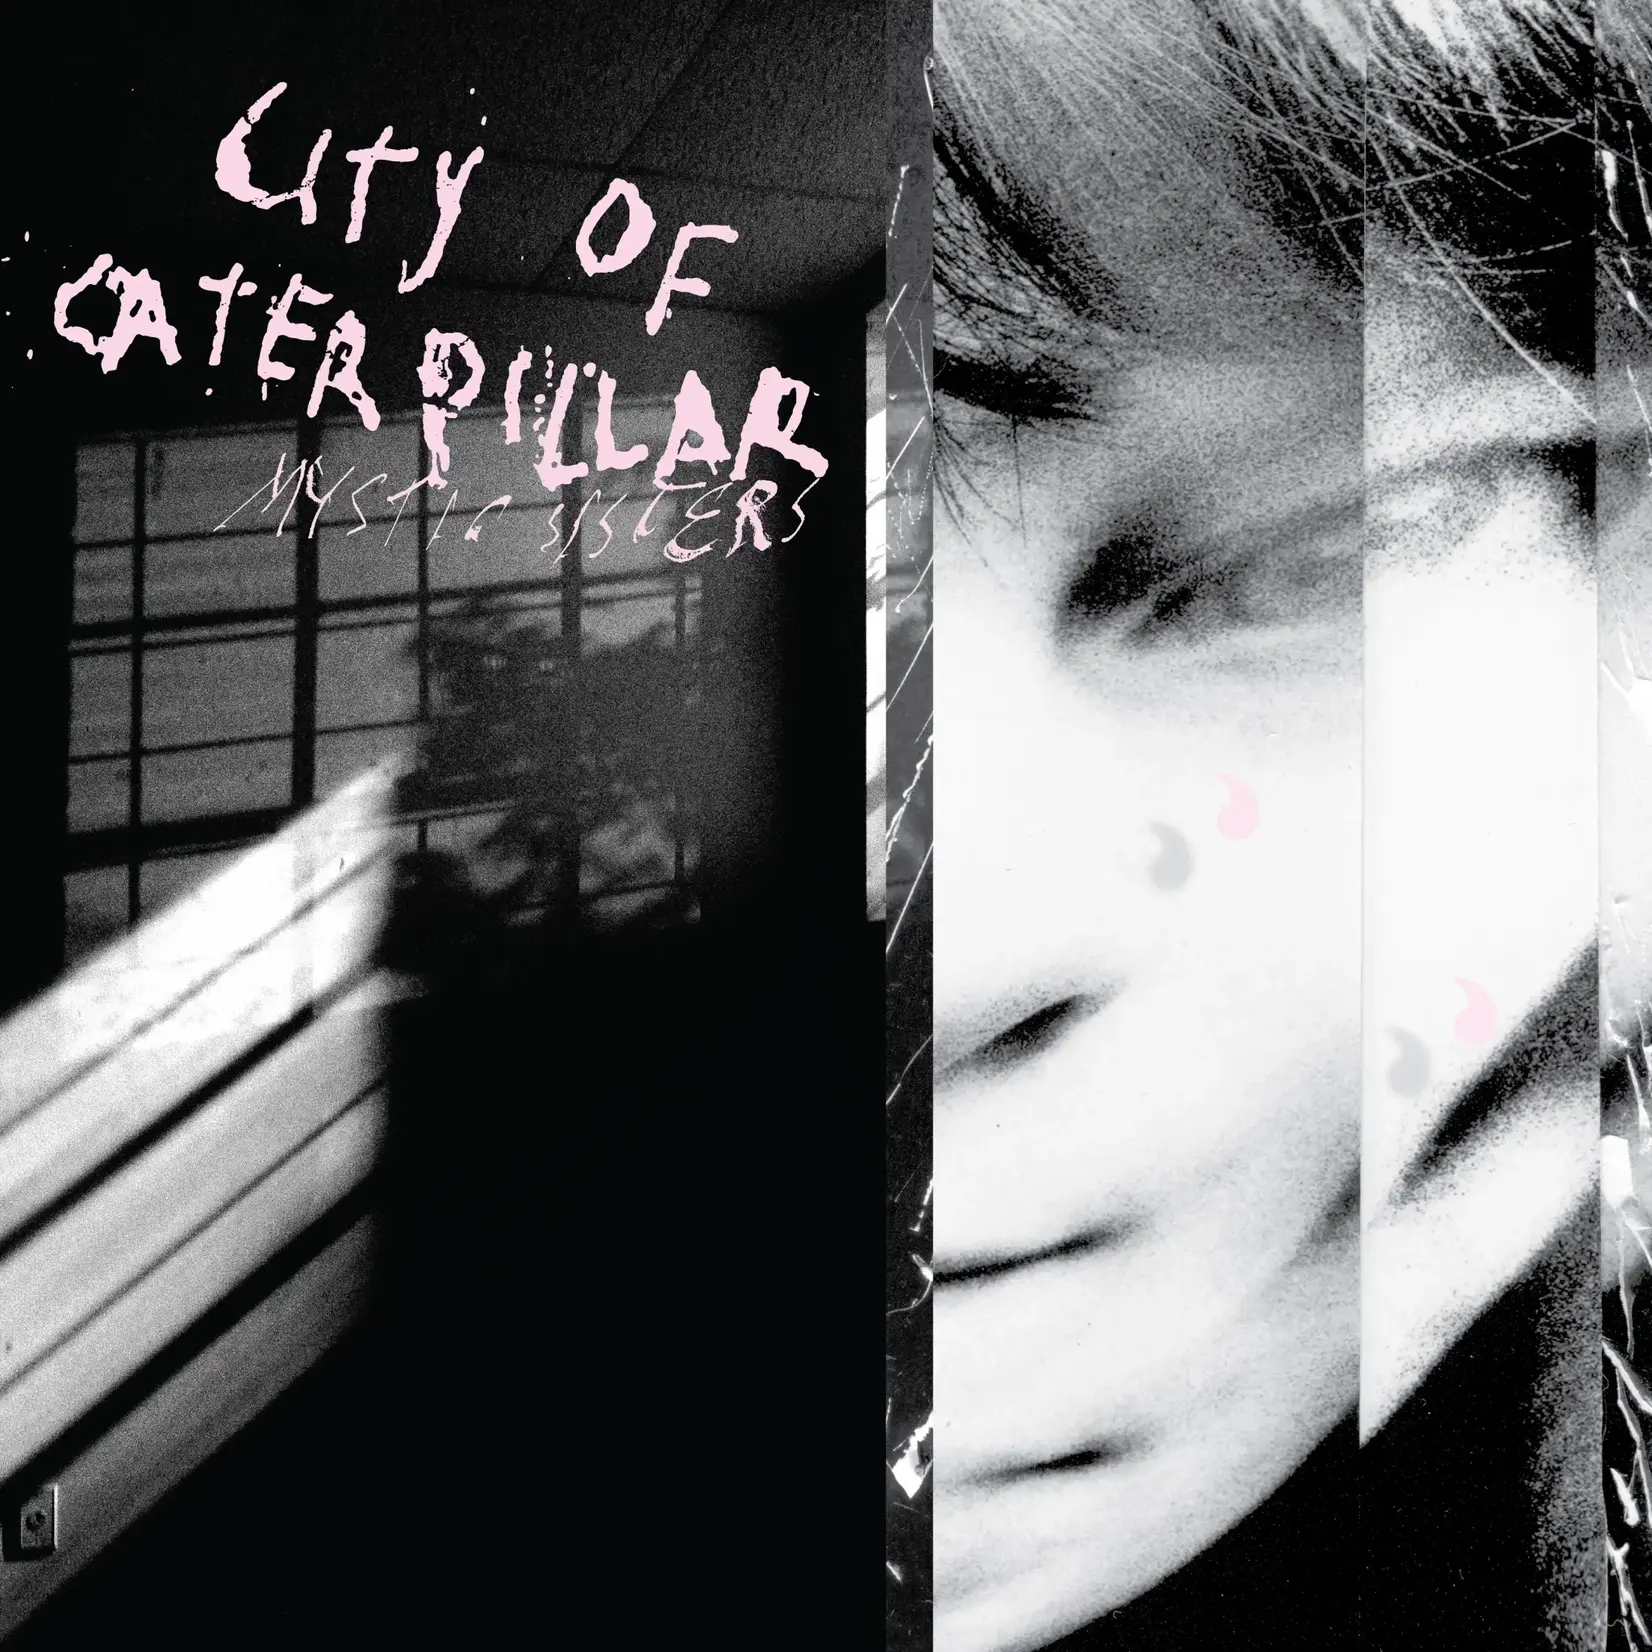 Relapse City of Caterpillar - Mystic Sisters (LP) [White]